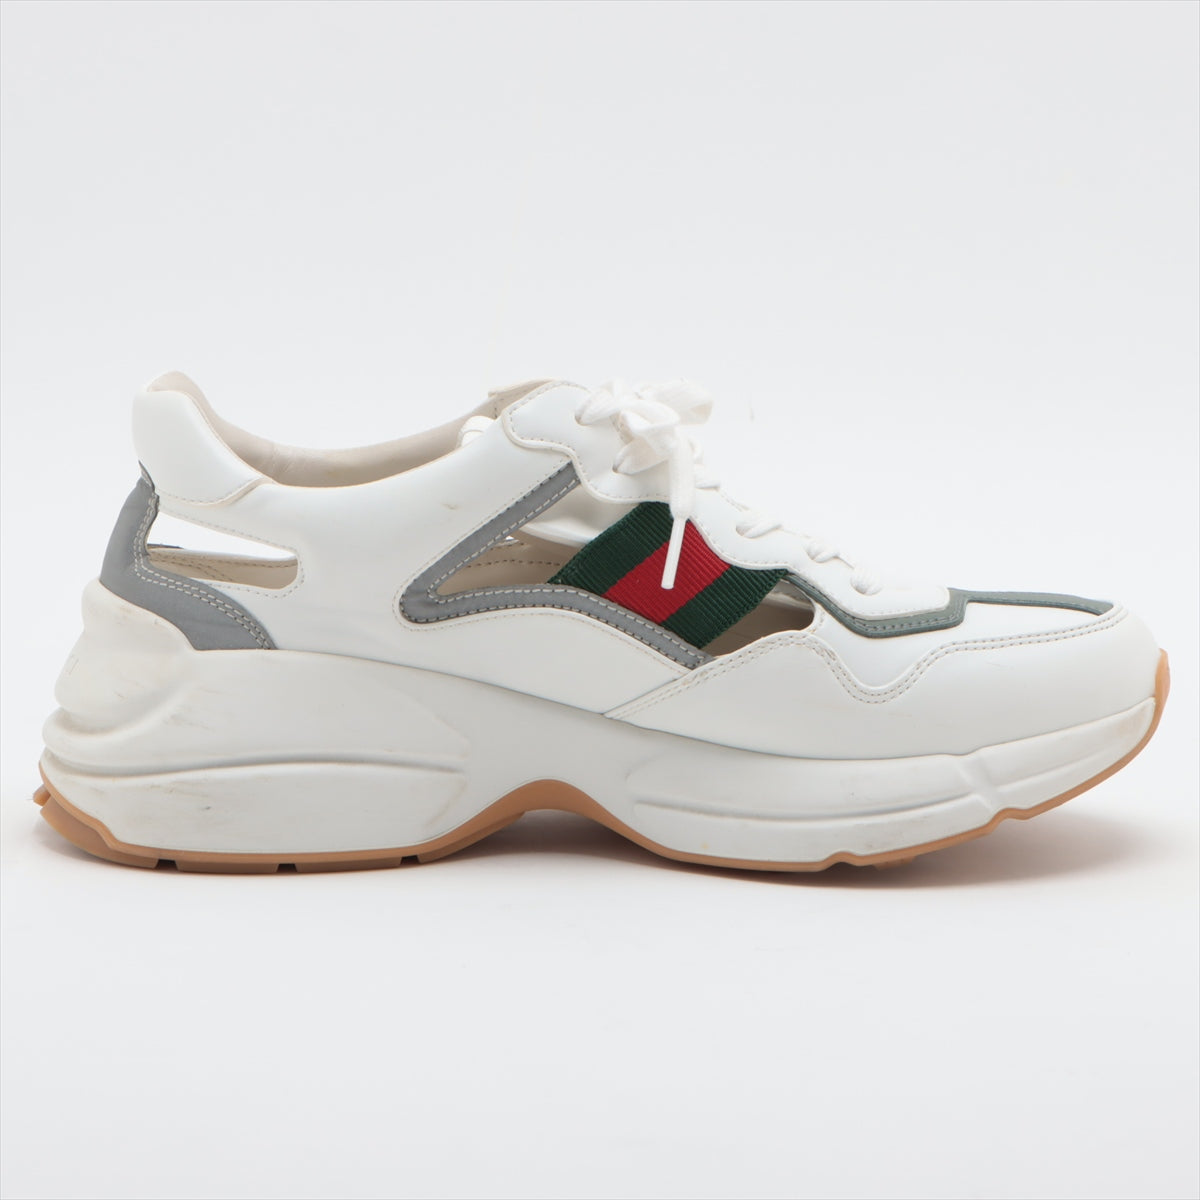 Gucci Sherry Line Leather Sneakers 8 Men's White 657977